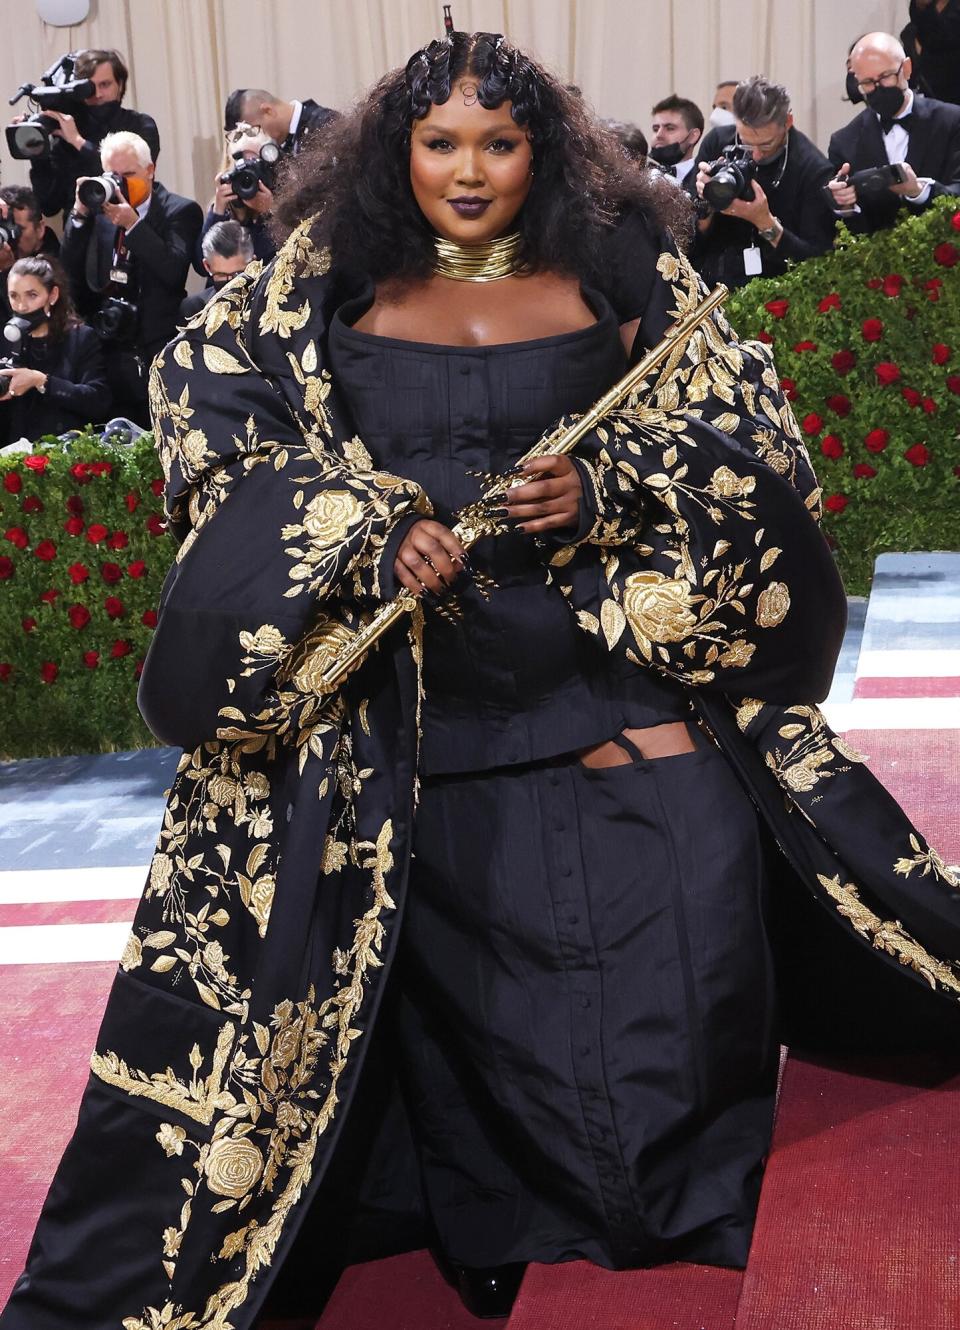 Lizzo attends "In America: An Anthology of Fashion," the 2022 Costume Institute Benefit at The Metropolitan Museum of Art on May 02, 2022 in New York City